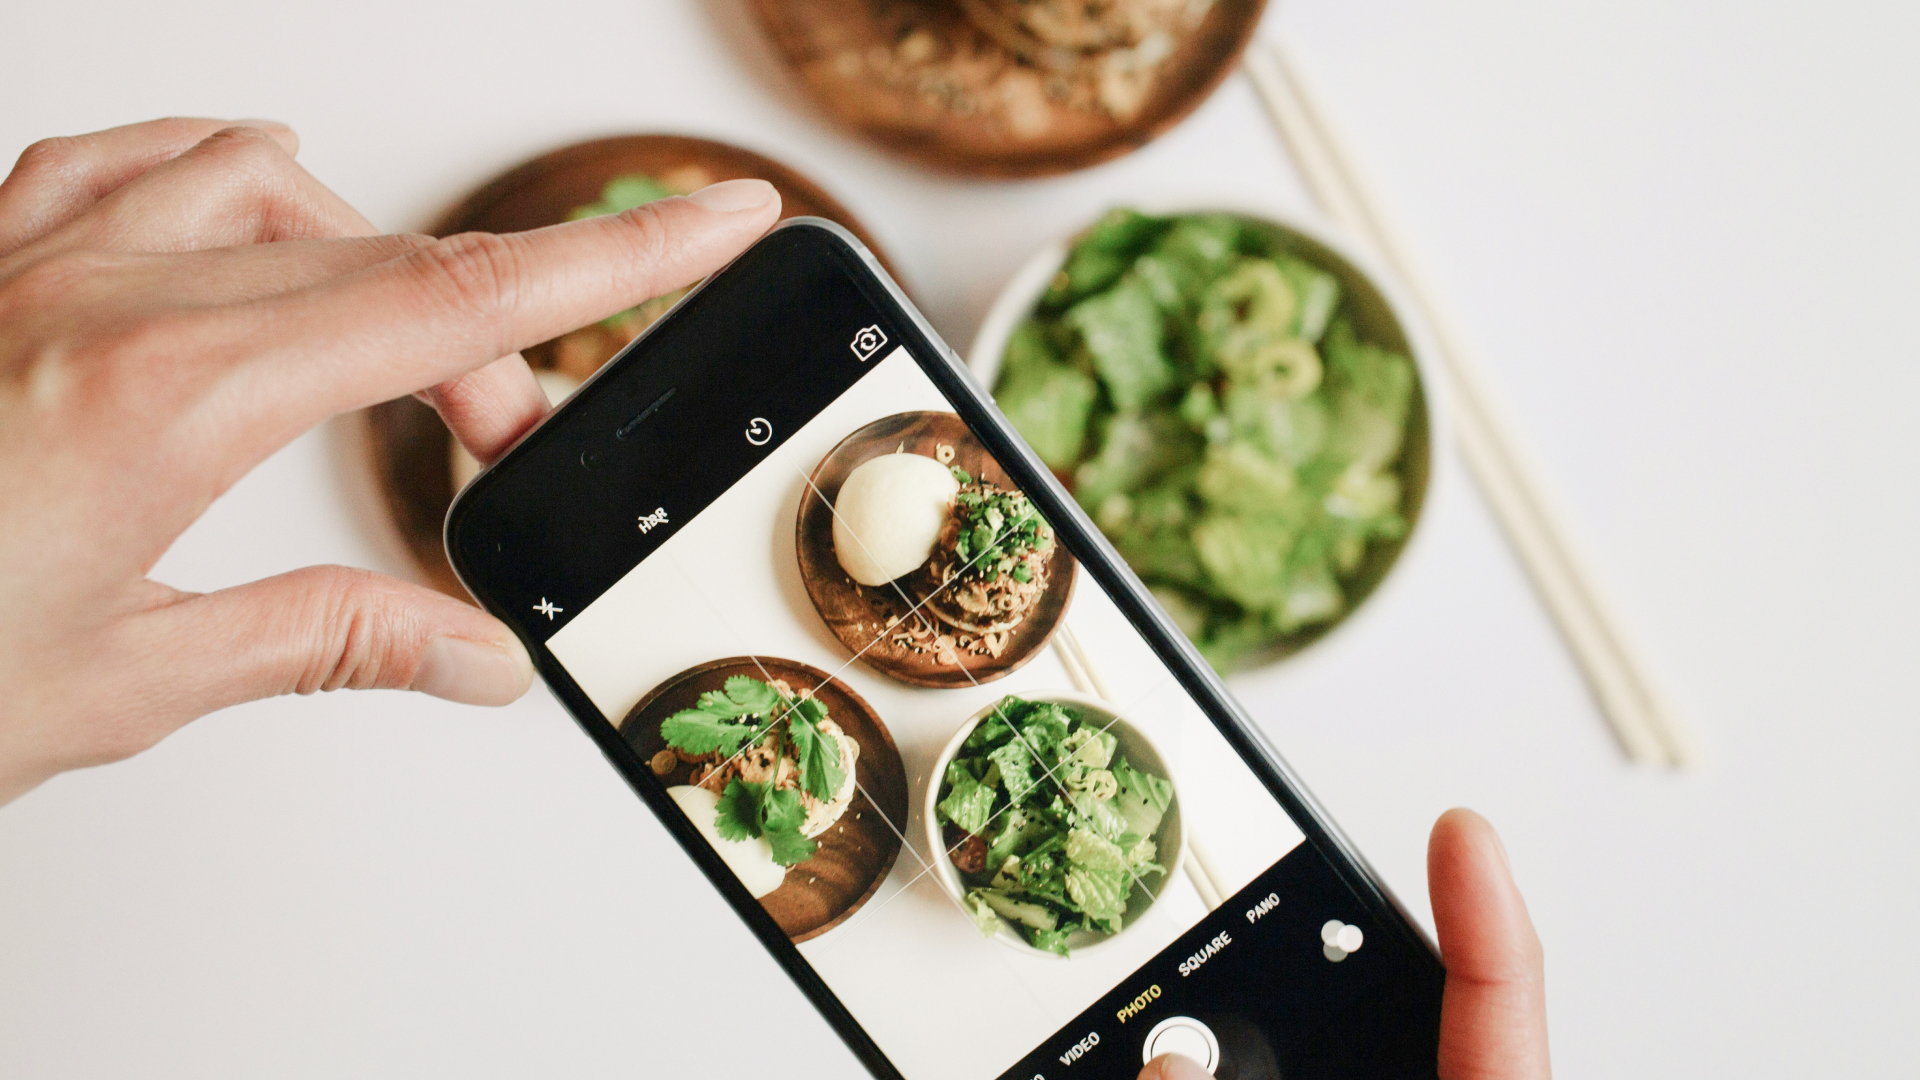 Social Media Marketing for food businesses (with visuals!)